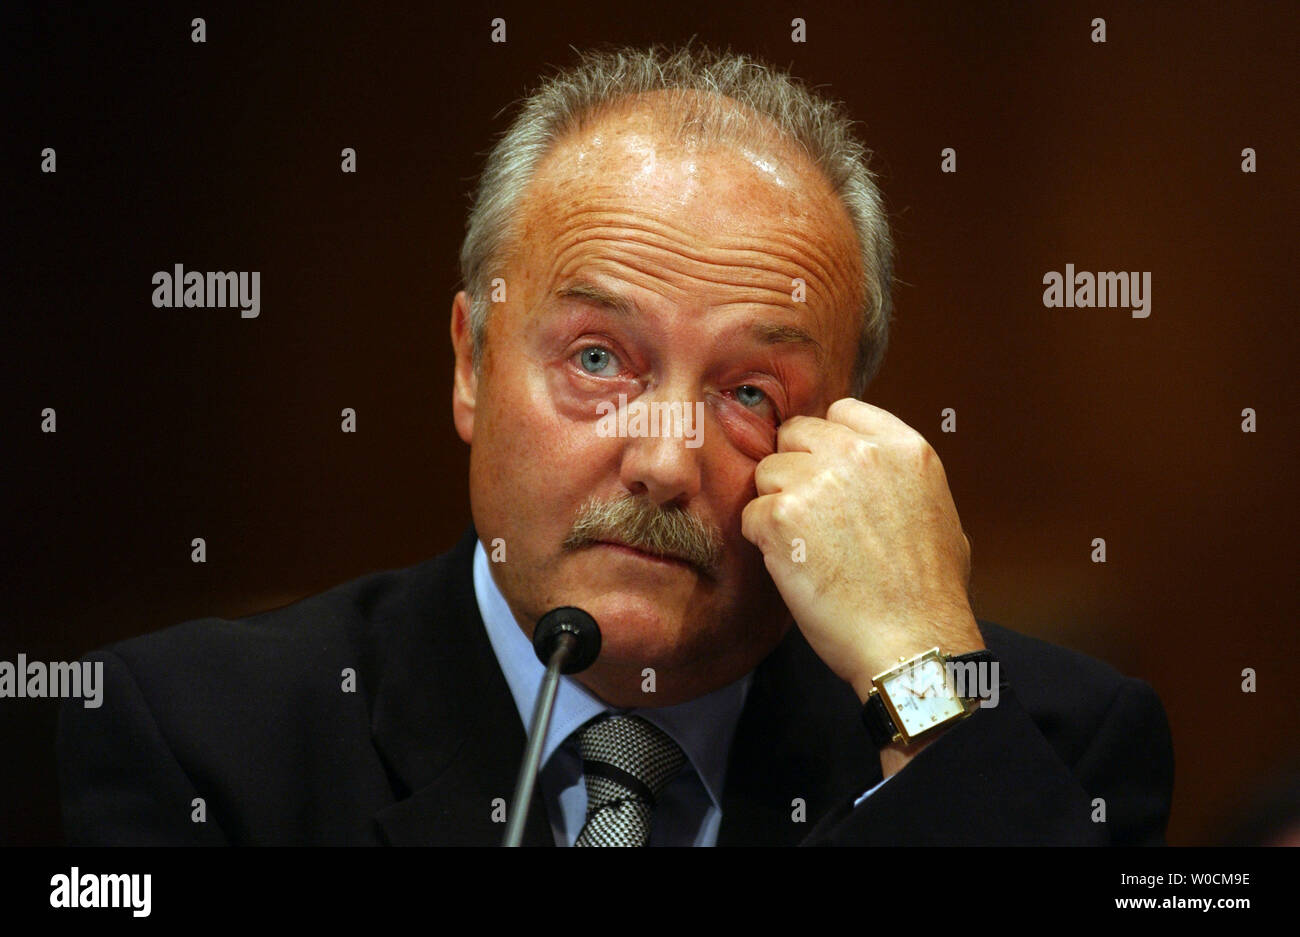 British lawmaker George Galloway testifies before a Senate committee investigating the U.N. oil for food program, on May 17, 2005 in Washington.  Galloway rejected a claim that Saddam Hussein awarded him lucrative allocations under the U.N. program.   (UPI Photo/Michael Kleinfeld) Stock Photo